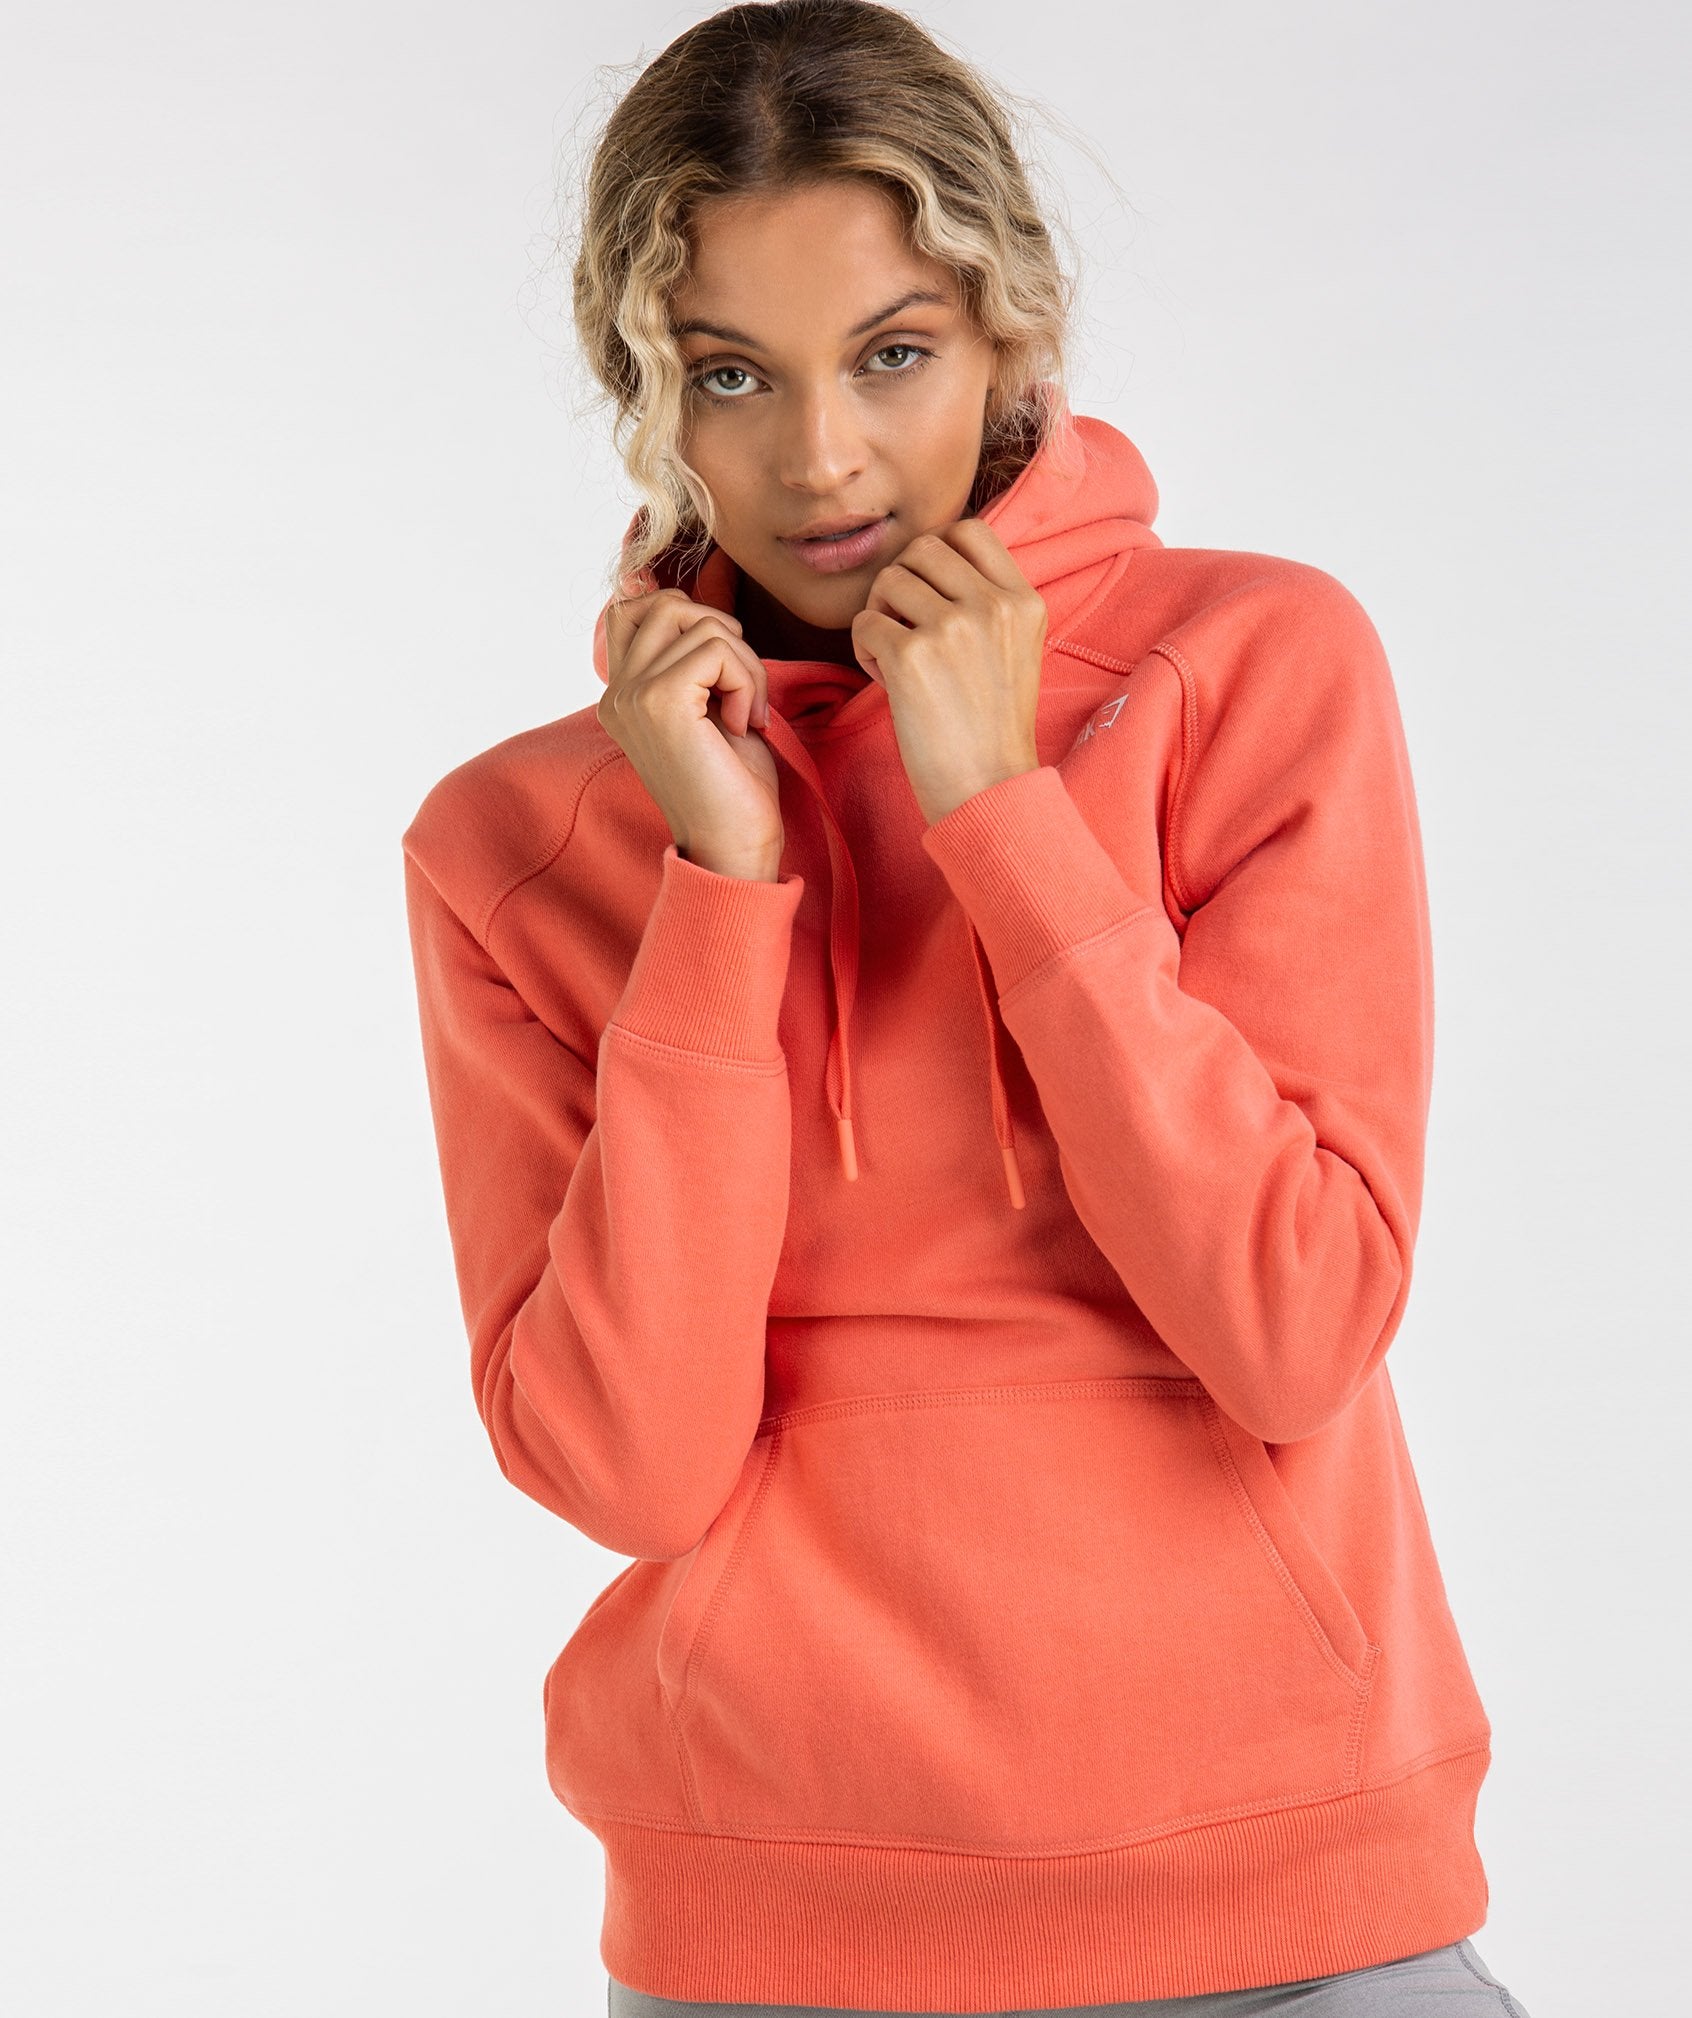 Crest Hoodie in Peach Coral - view 4